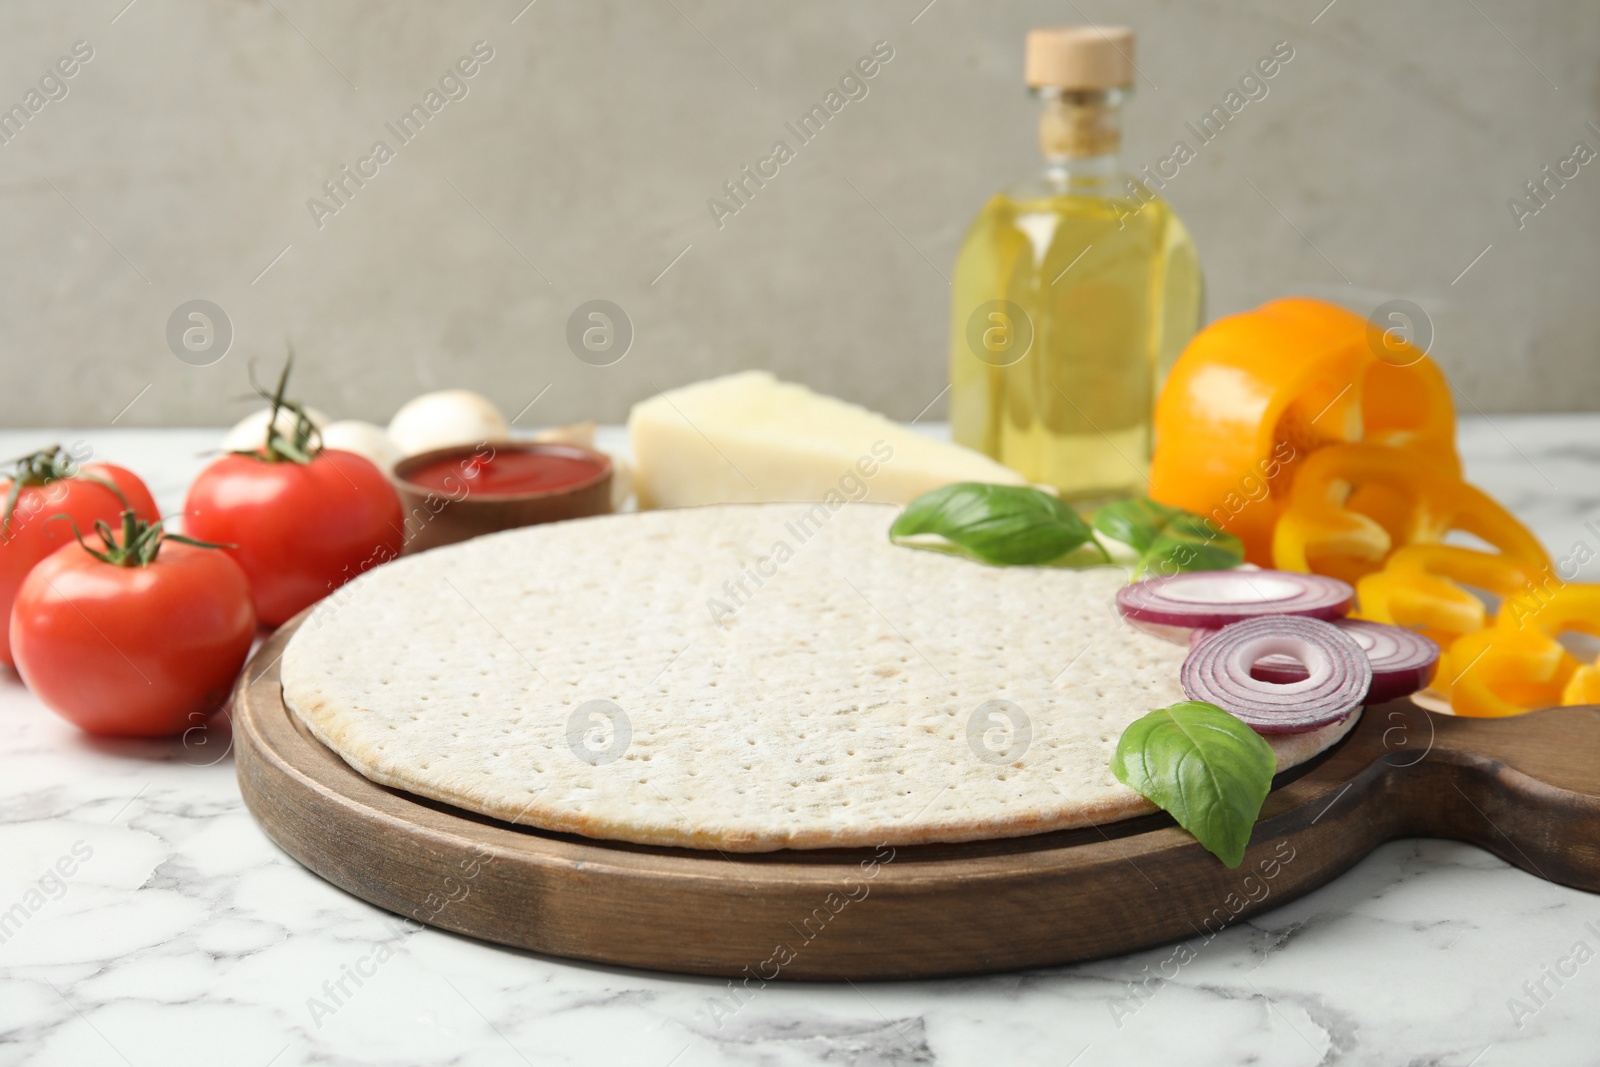 Photo of Base and ingredients for pizza on marble table against light background